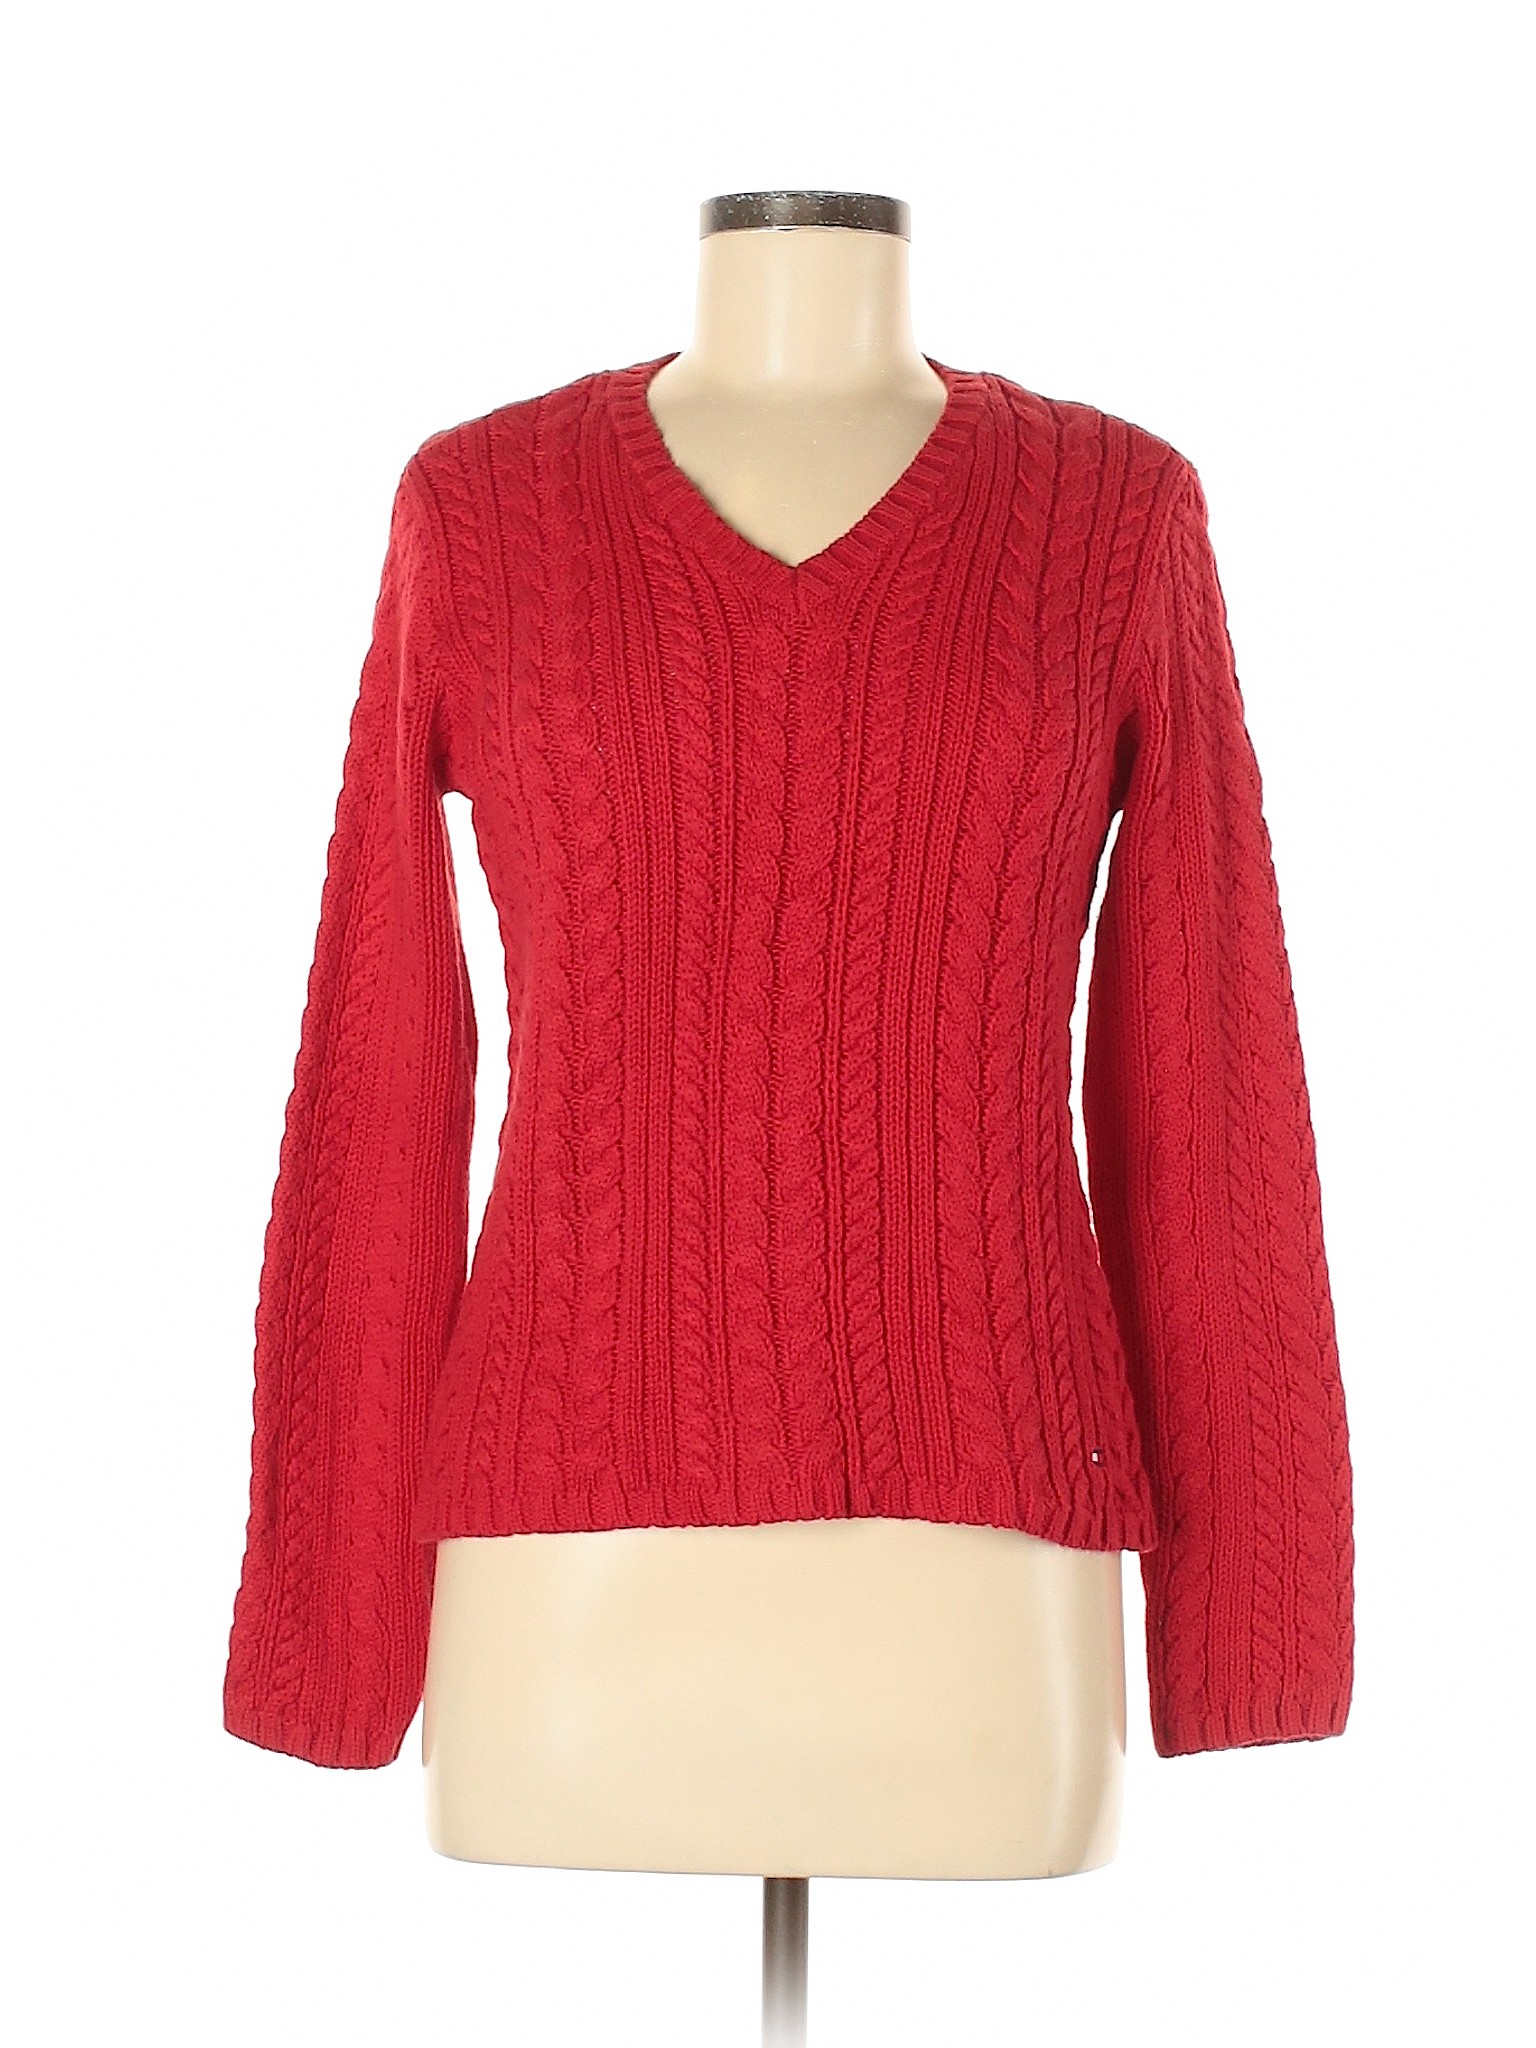 Tommy Hilfiger Women Red Pullover Sweater S | eBay